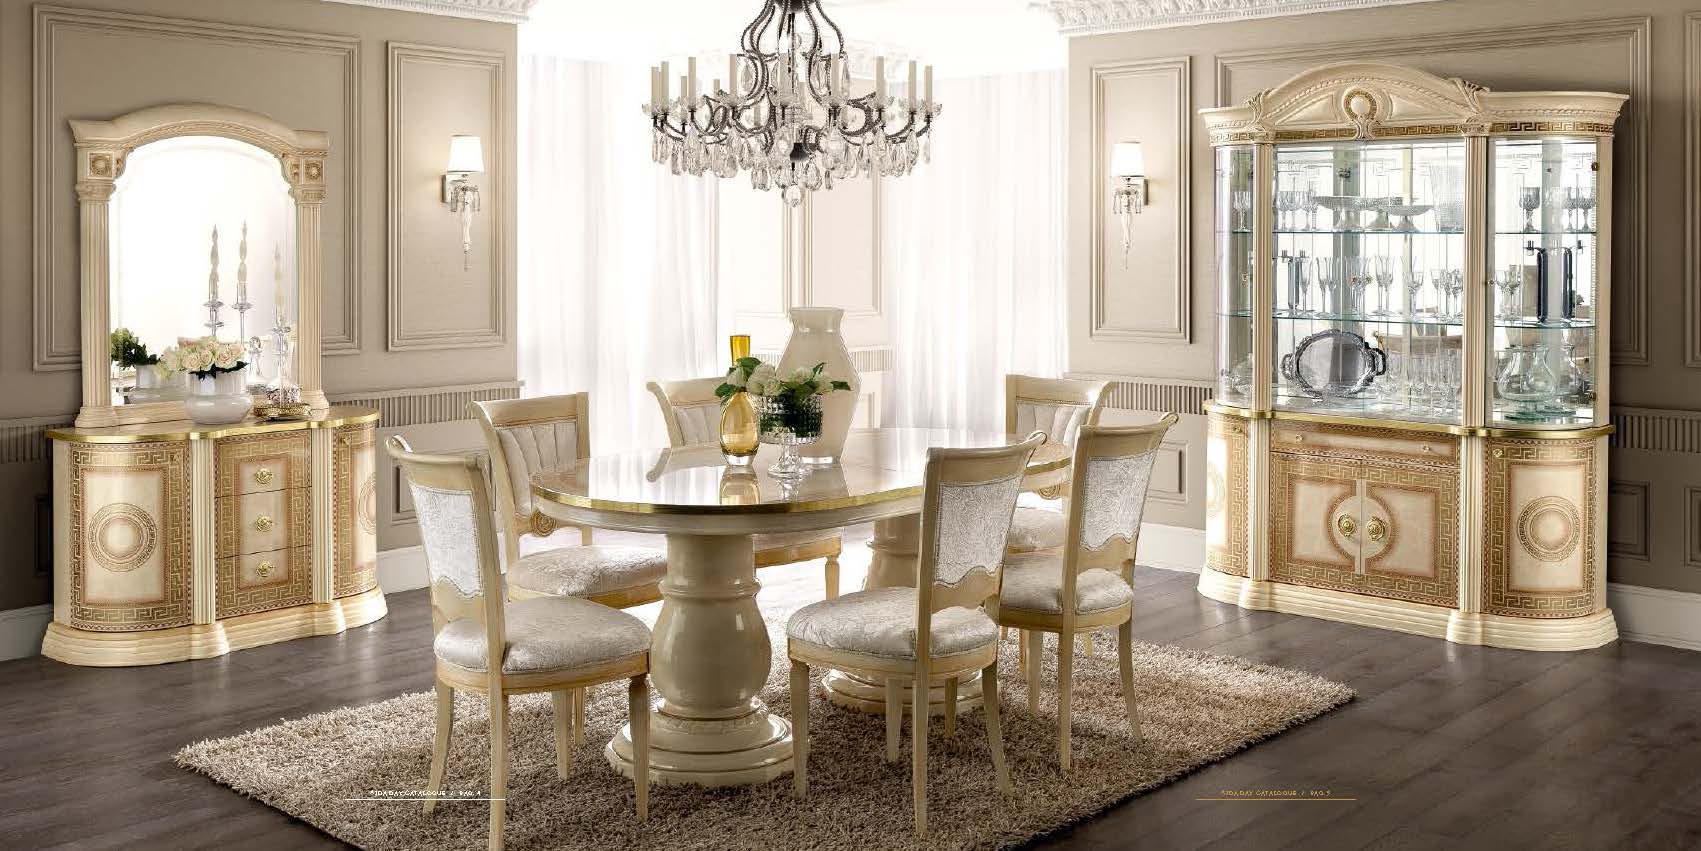 Dining Room Furniture Chairs Aida Dining Additional Items